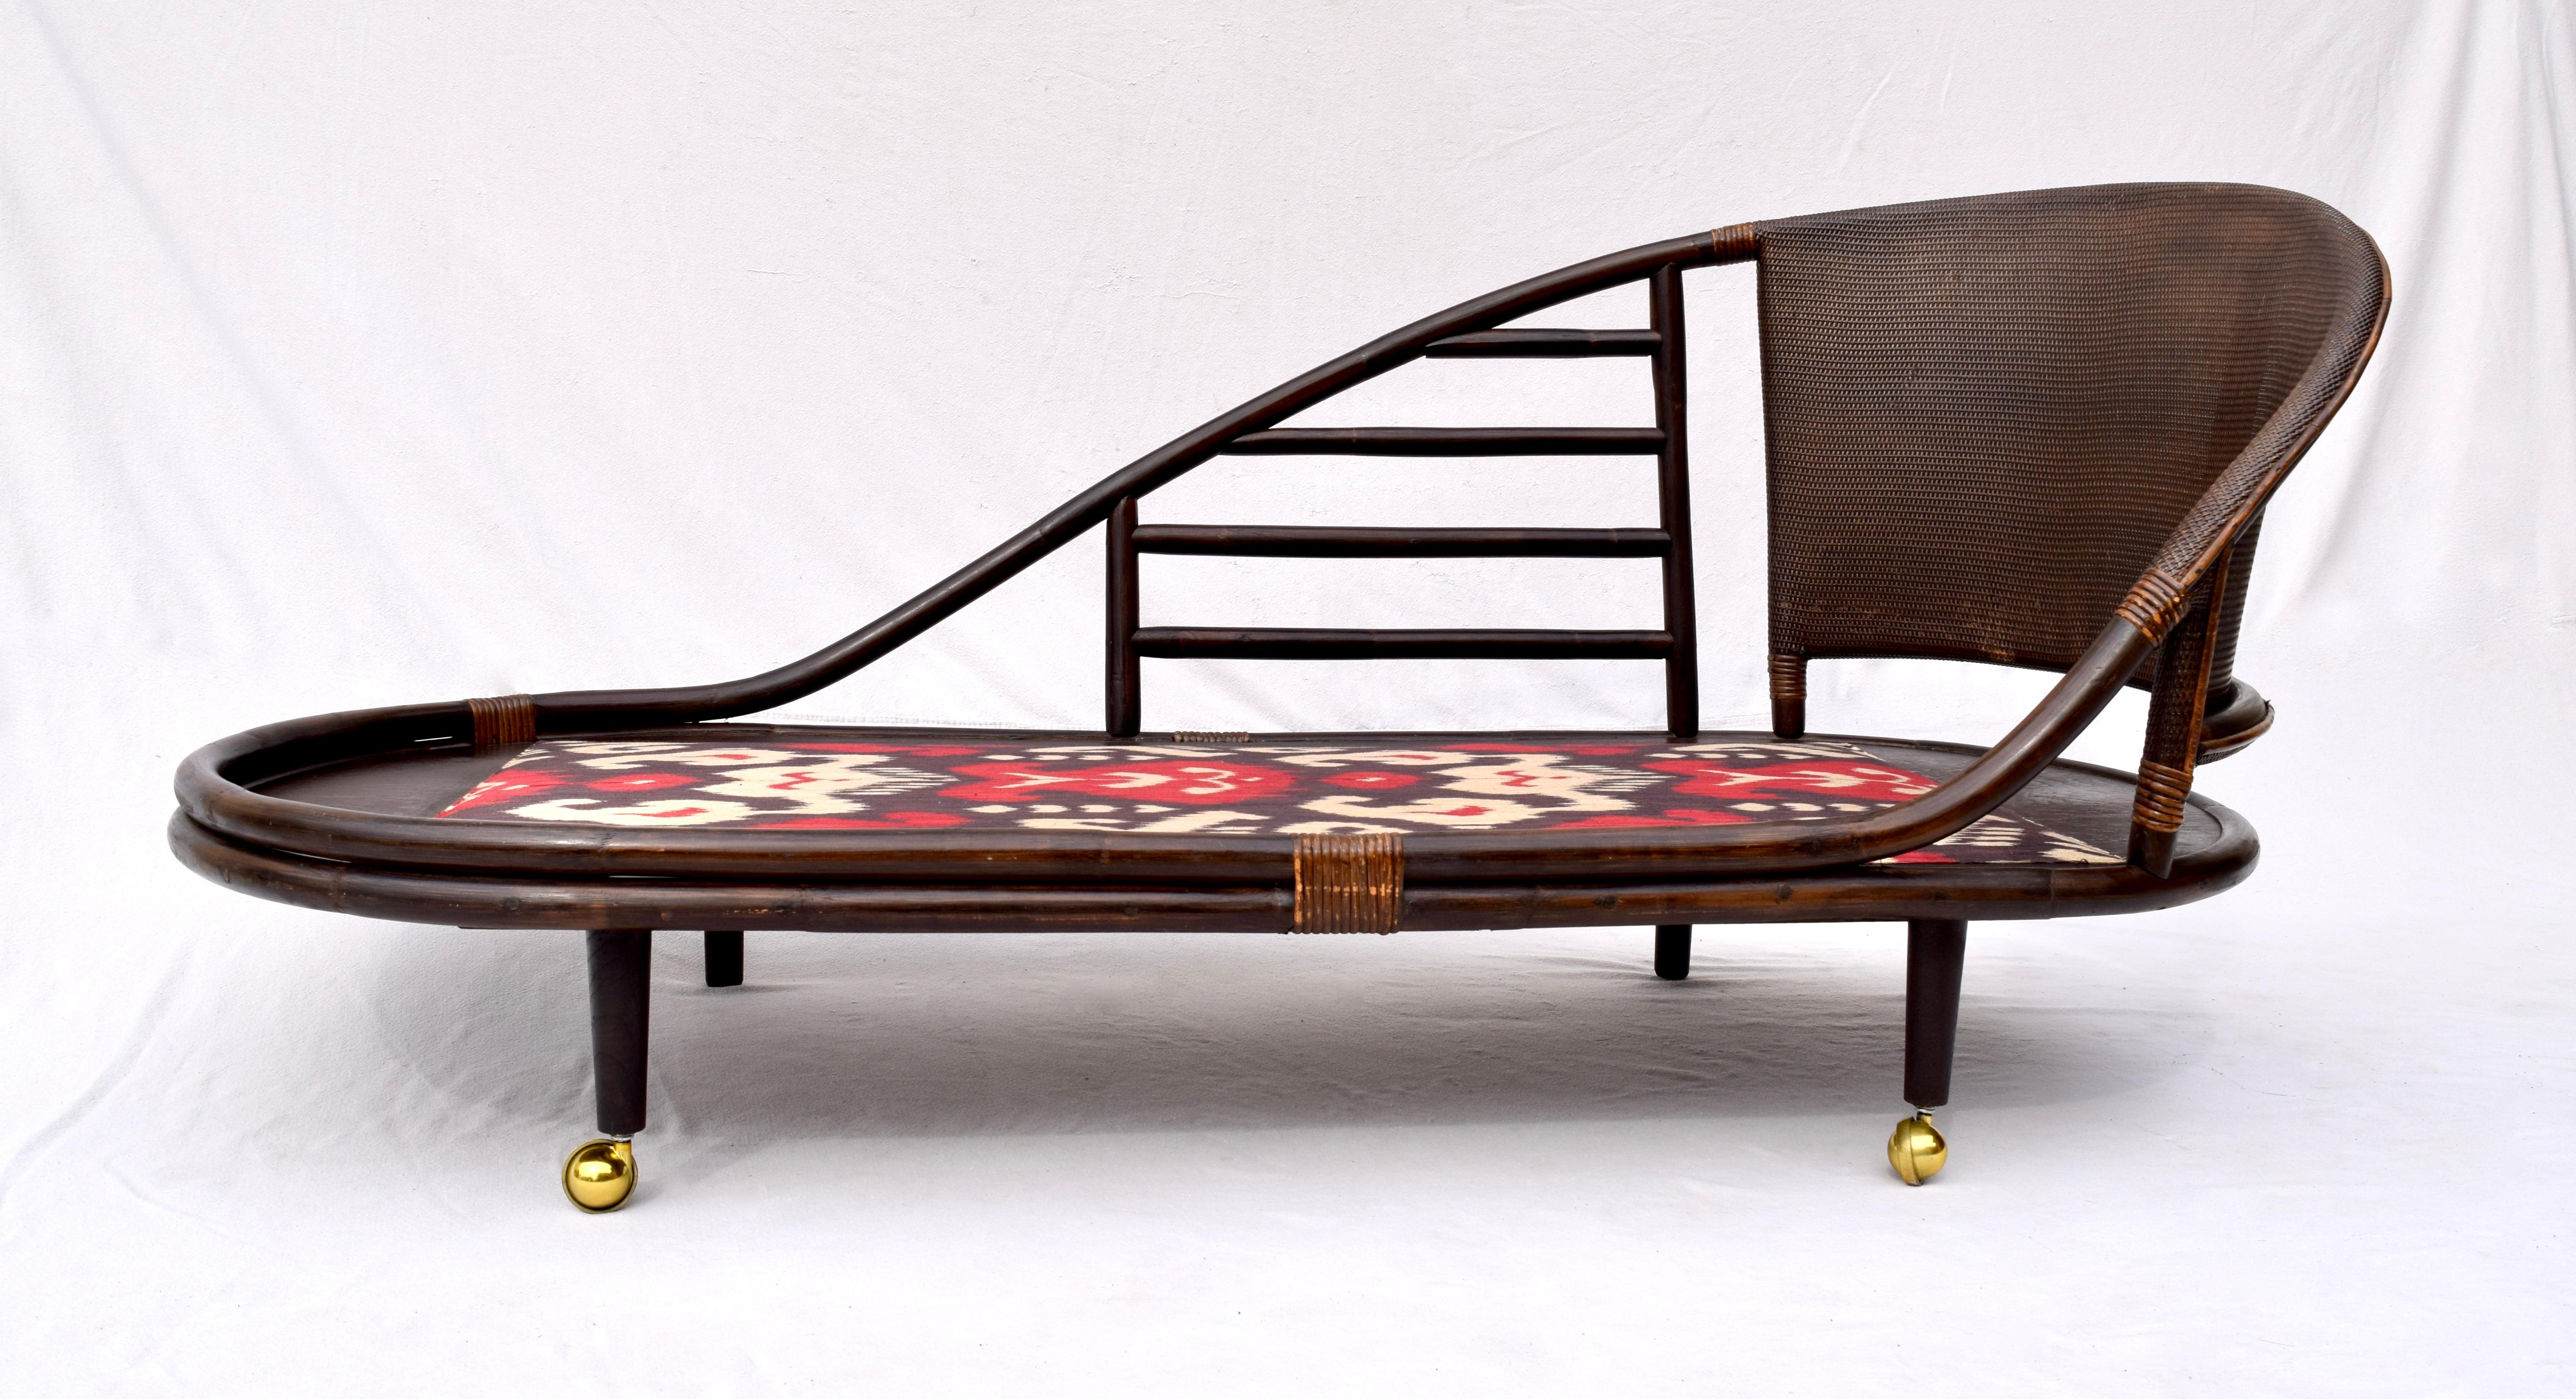 A sculptural chinoiserie rattan chaise lounge with curved saucer shaped grasscloth back rest.
Newly upholstered in striking Ikat silk this unusual chaise is cleverly designed with two brass casters allowing for easy lift and maneuvering from the